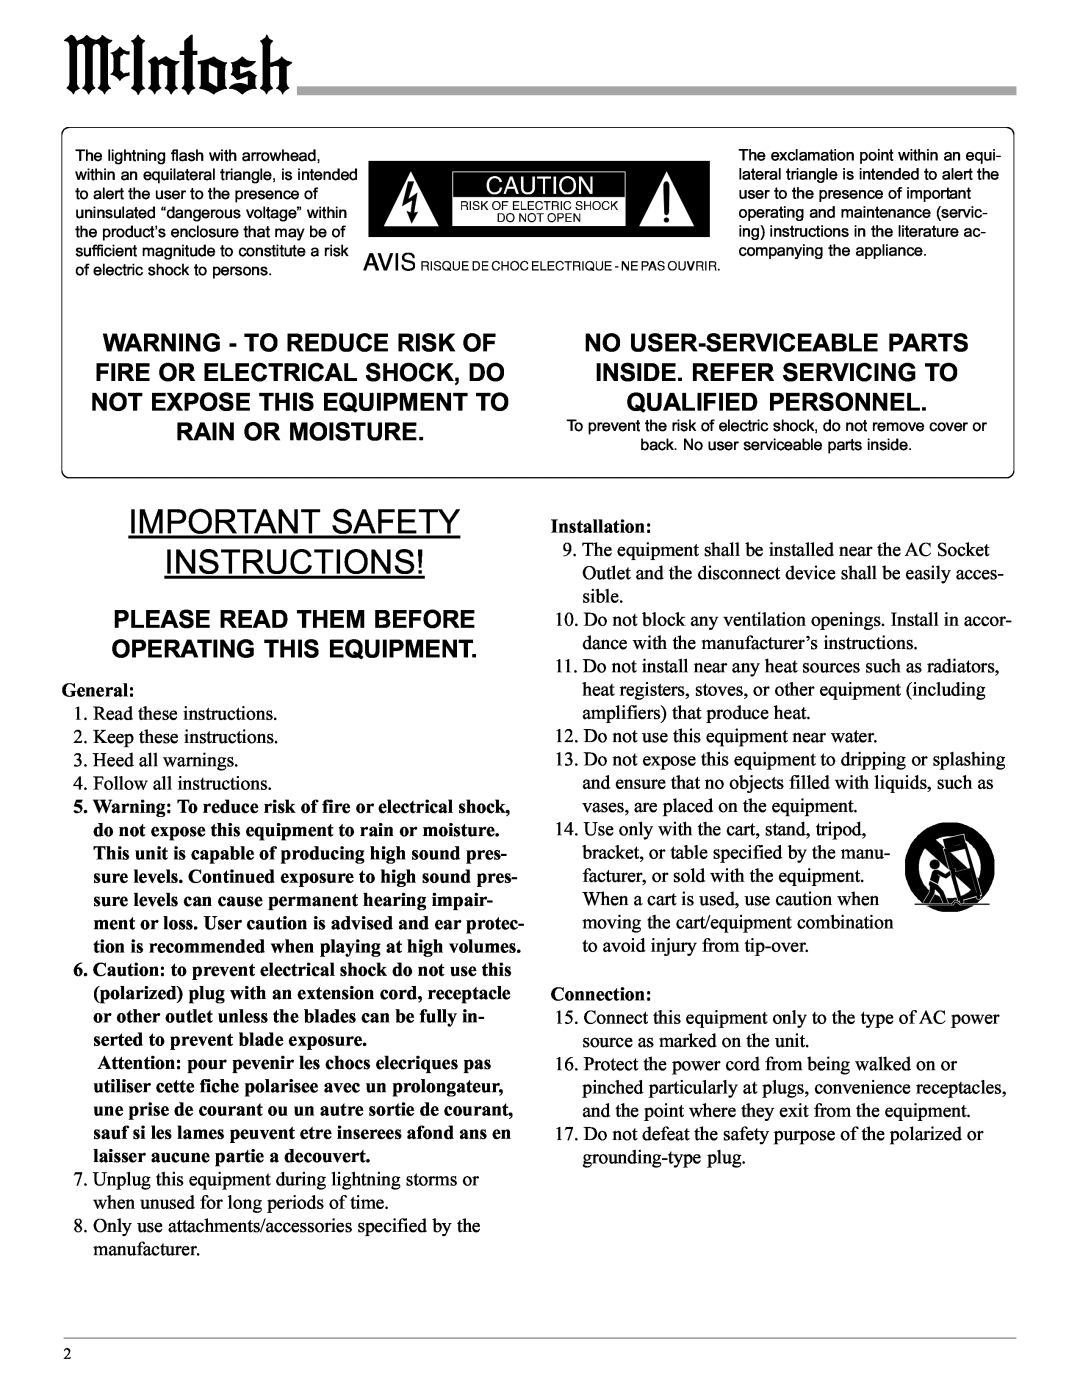 McIntosh PS112 manual Important Safety Instructions, Please Read Them Before Operating This Equipment 